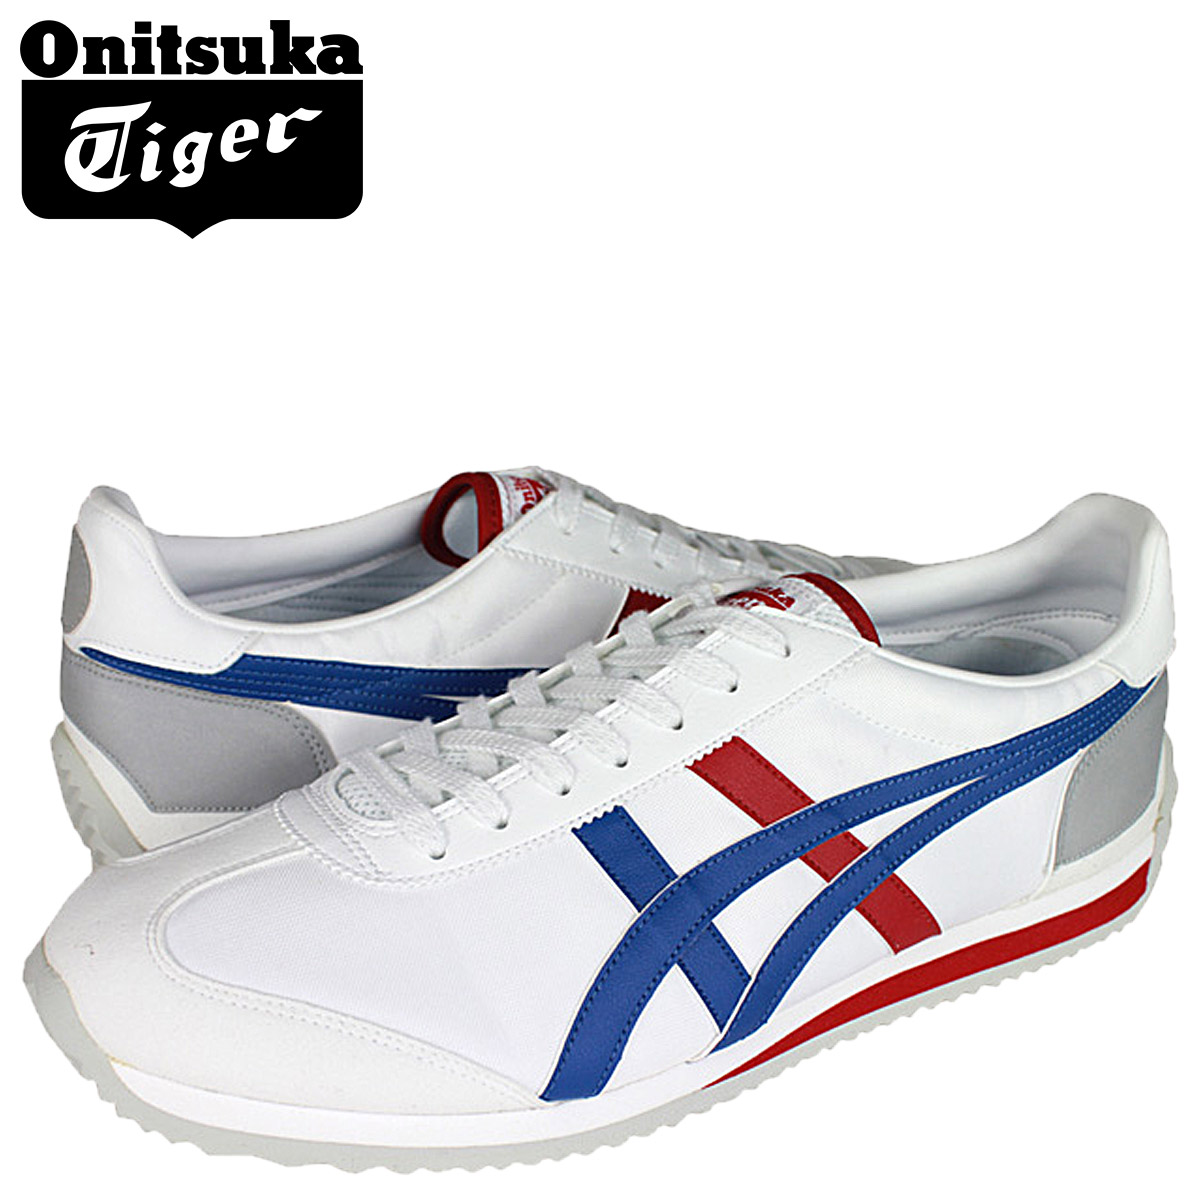 difference between asics and onitsuka 